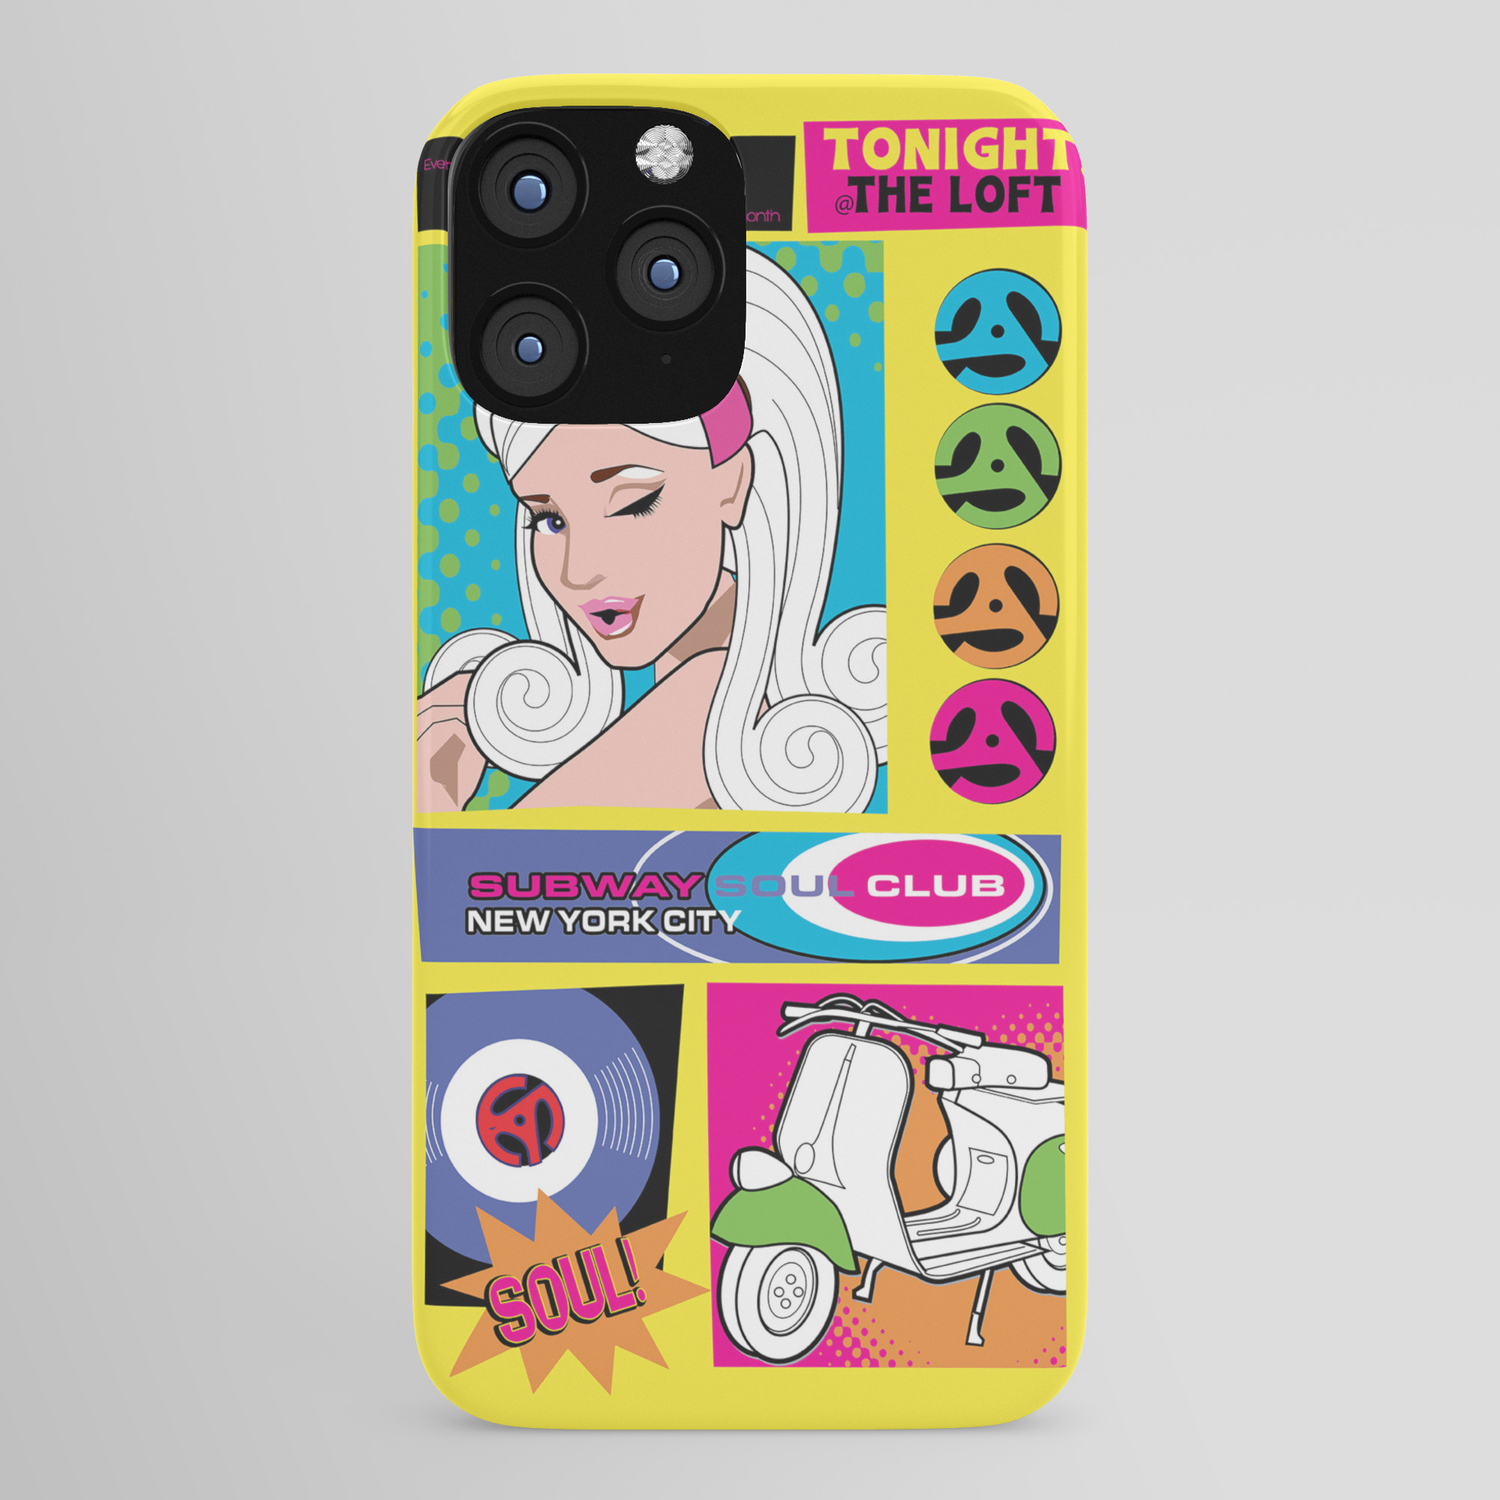 The Loft Subway Soul By Dawn Carrington Iphone Case By Subway Soul Society6